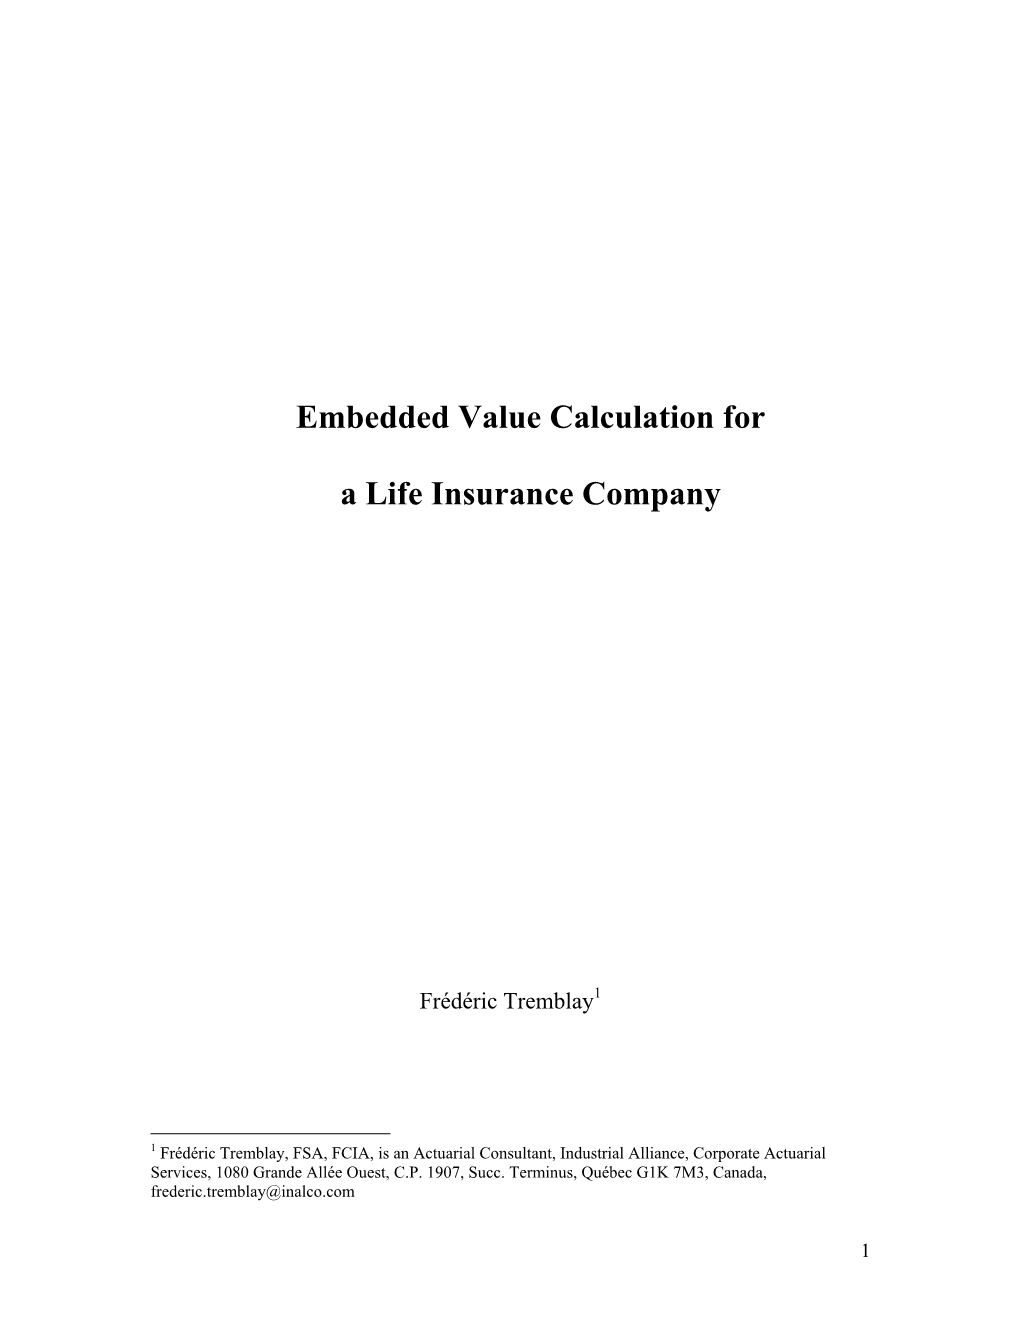 Embedded Value Calculation for a Life Insurance Company